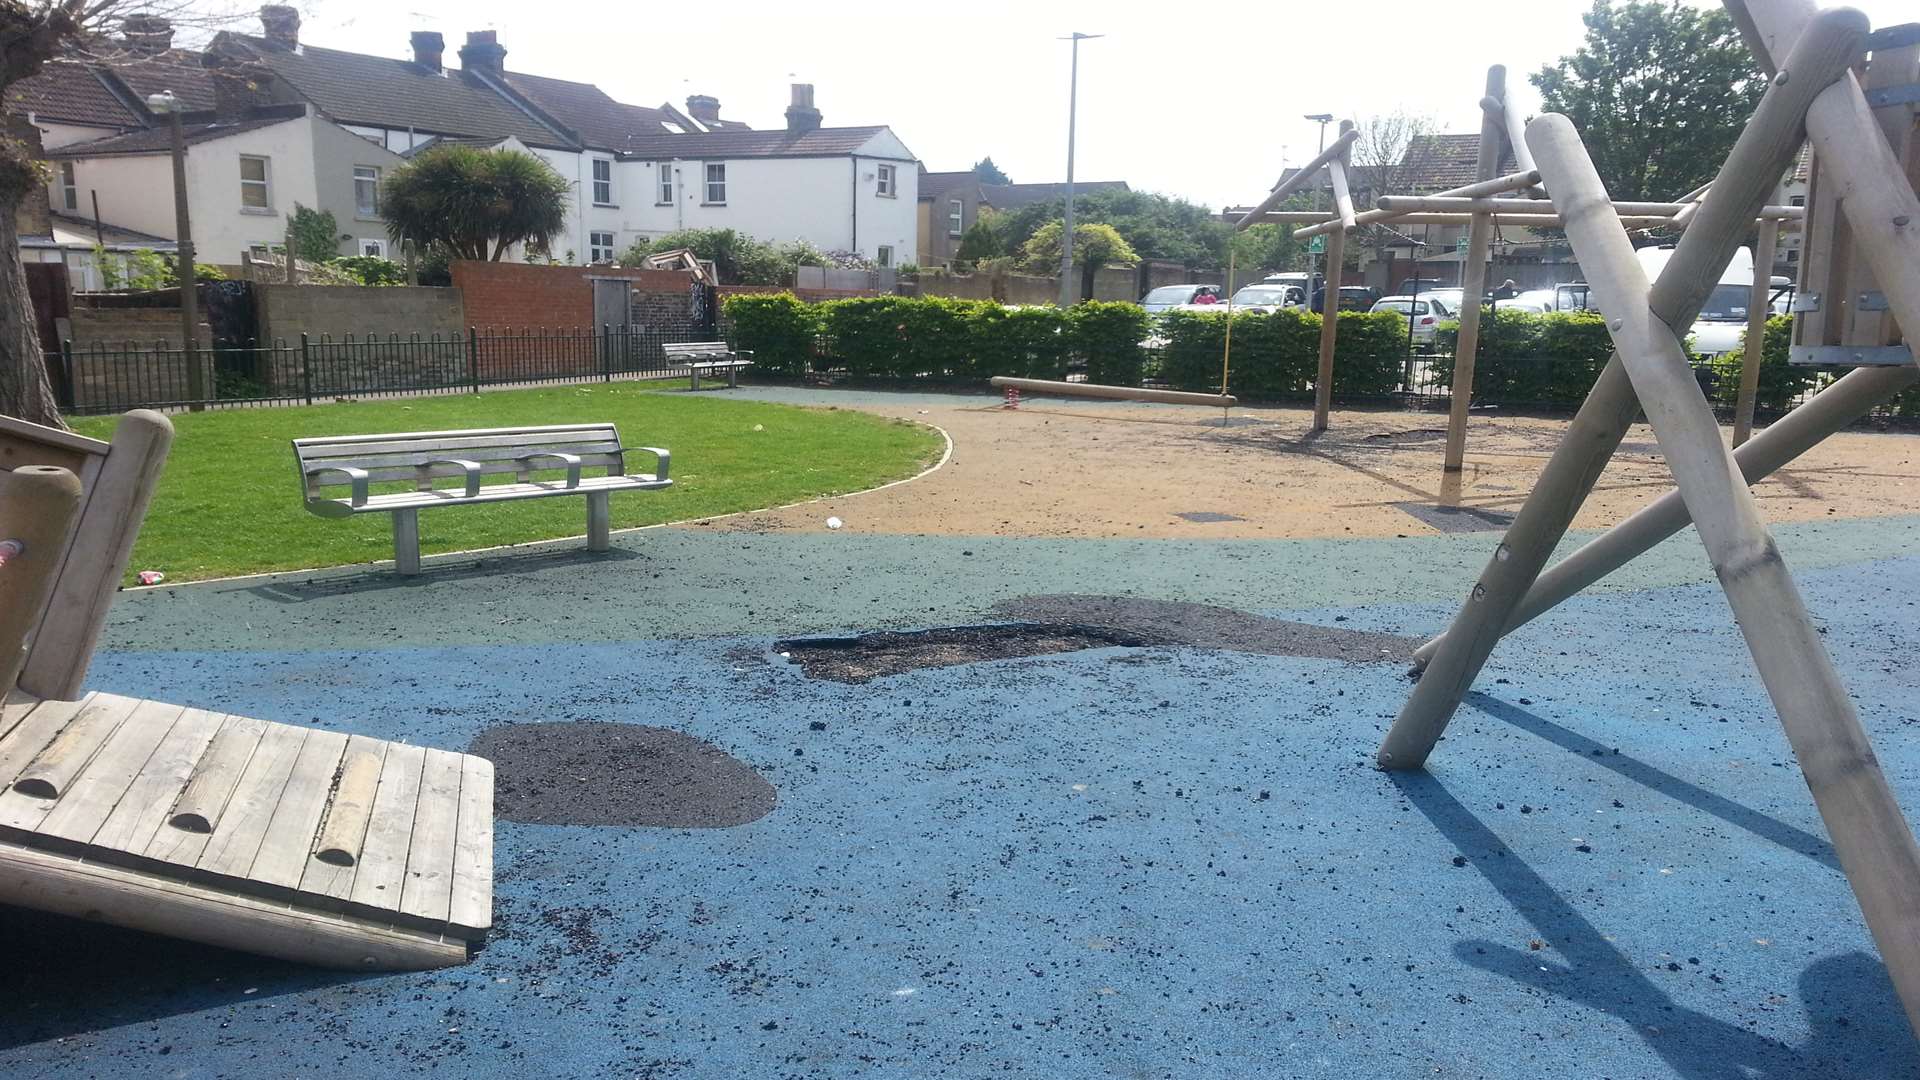 One resident said children are no longer being taken to the gardens because of the anti social behaviour